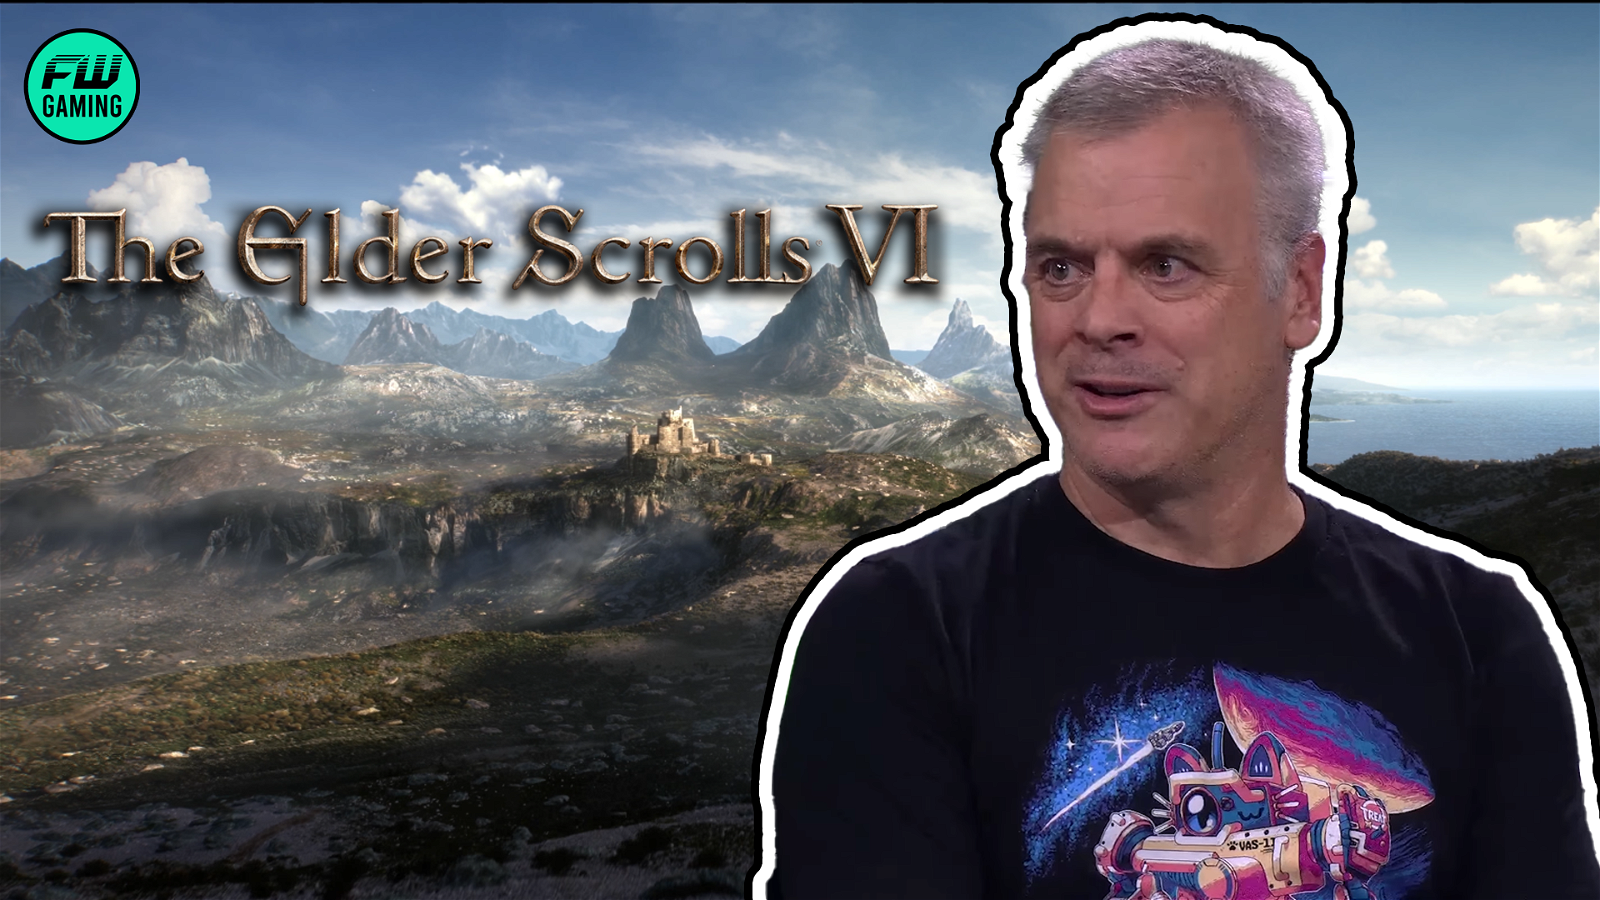 Bethesda’s Pete Hines Says The Elder Scrolls VI Has Left Pre-Production and Entered Early Development